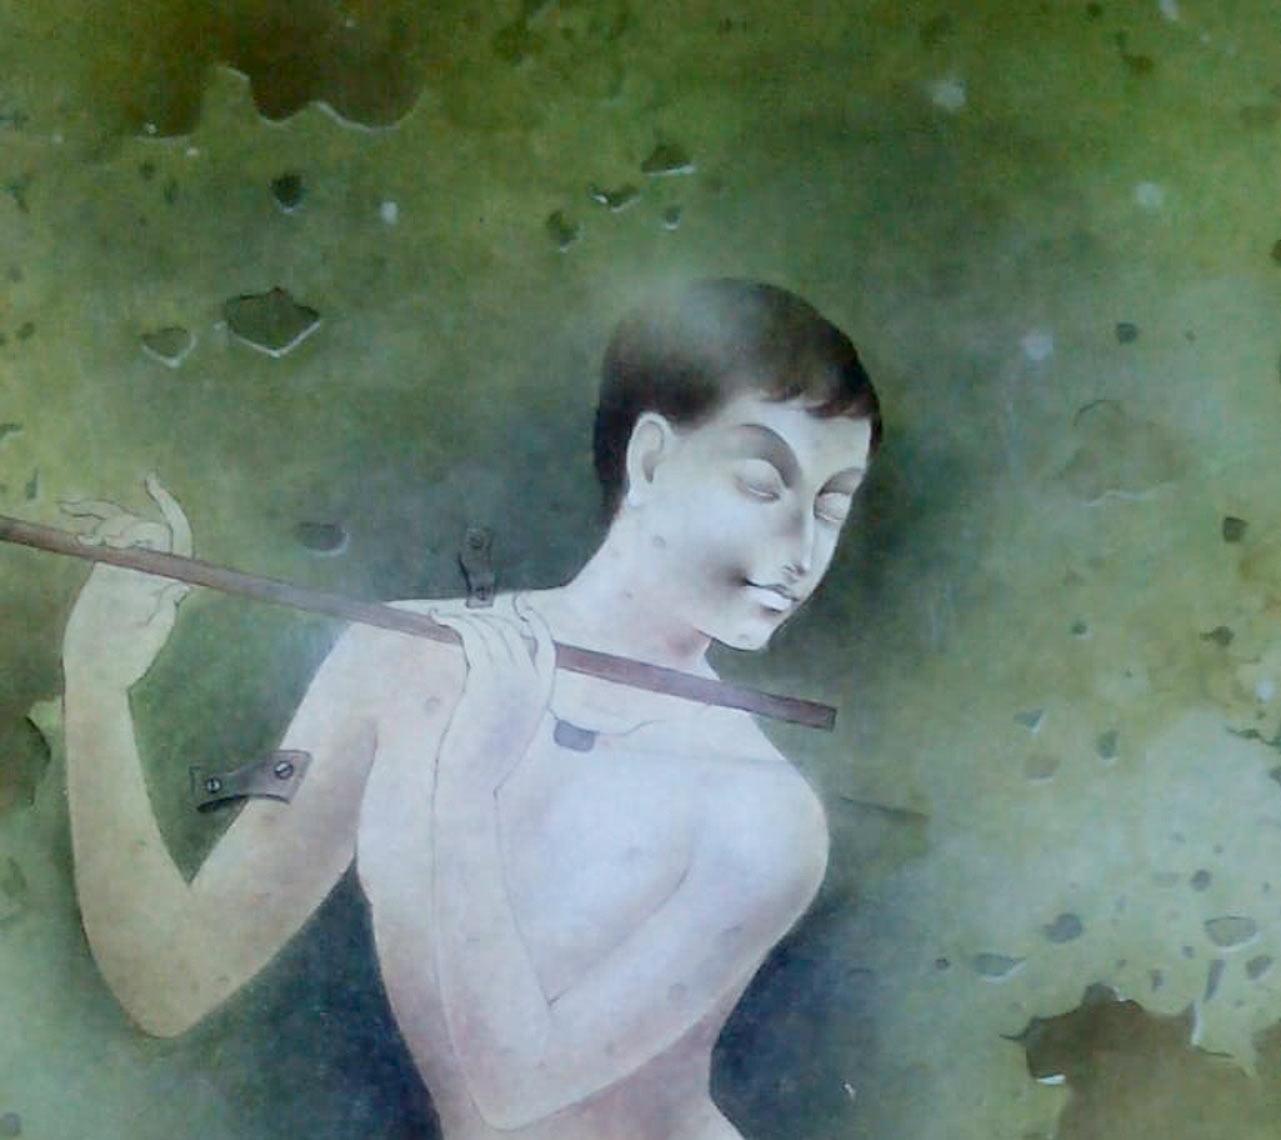 Mintu Naiya - Boy Playing Flute - 16 x 9 inches ( unframed size )
Mixed Media on paper
** Shipped in roll form.

About the Artist & his Art work :
Born : November, 1976.

Education :
Graduate from Calcutta University,Trained in Indian painting from